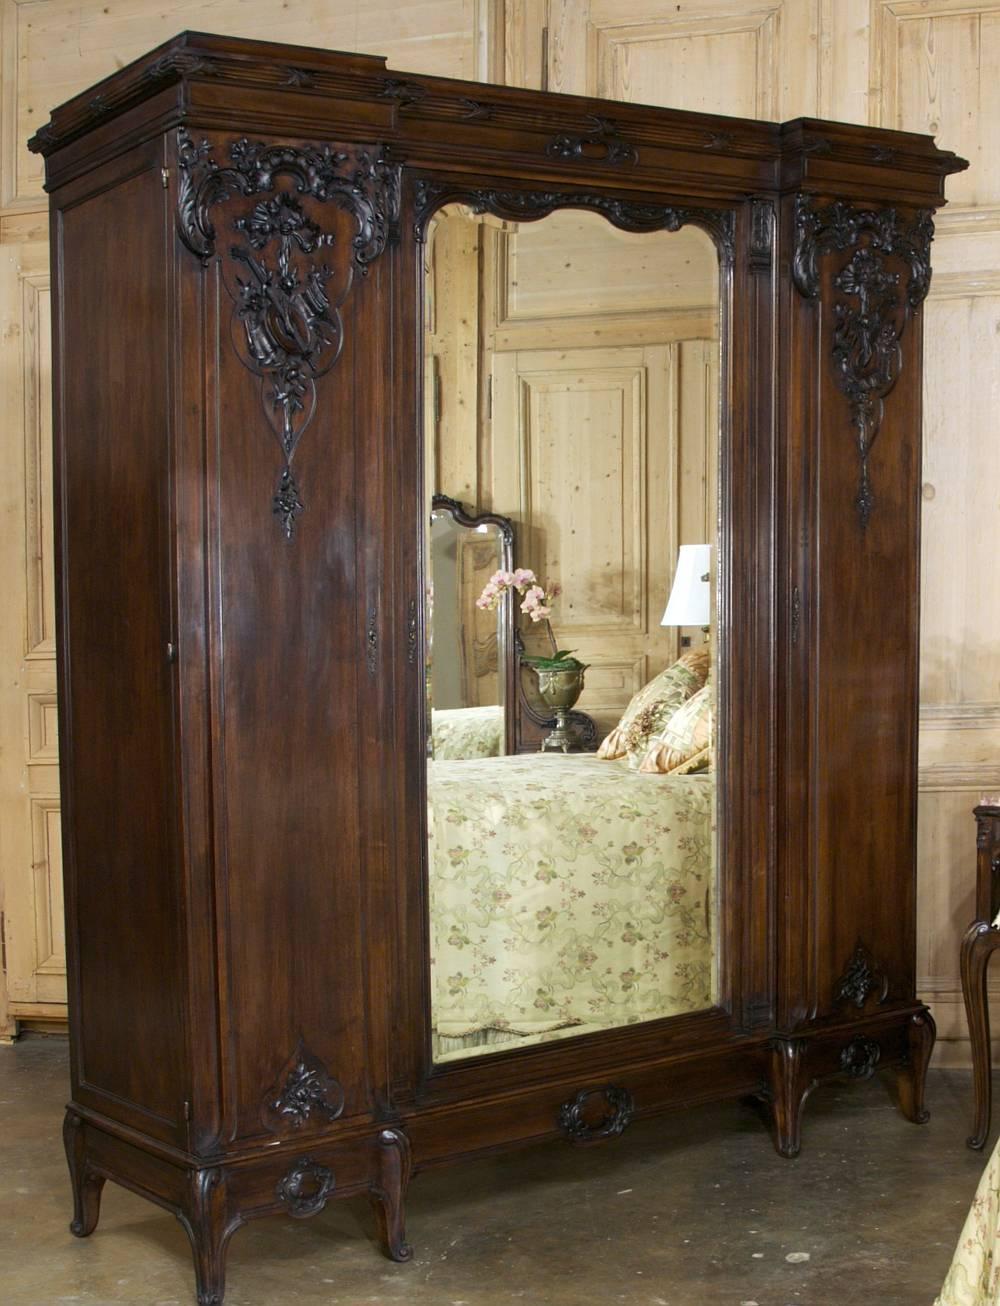 Baroque Revival 19th Century French Walnut Neoclassical Bedroom Set